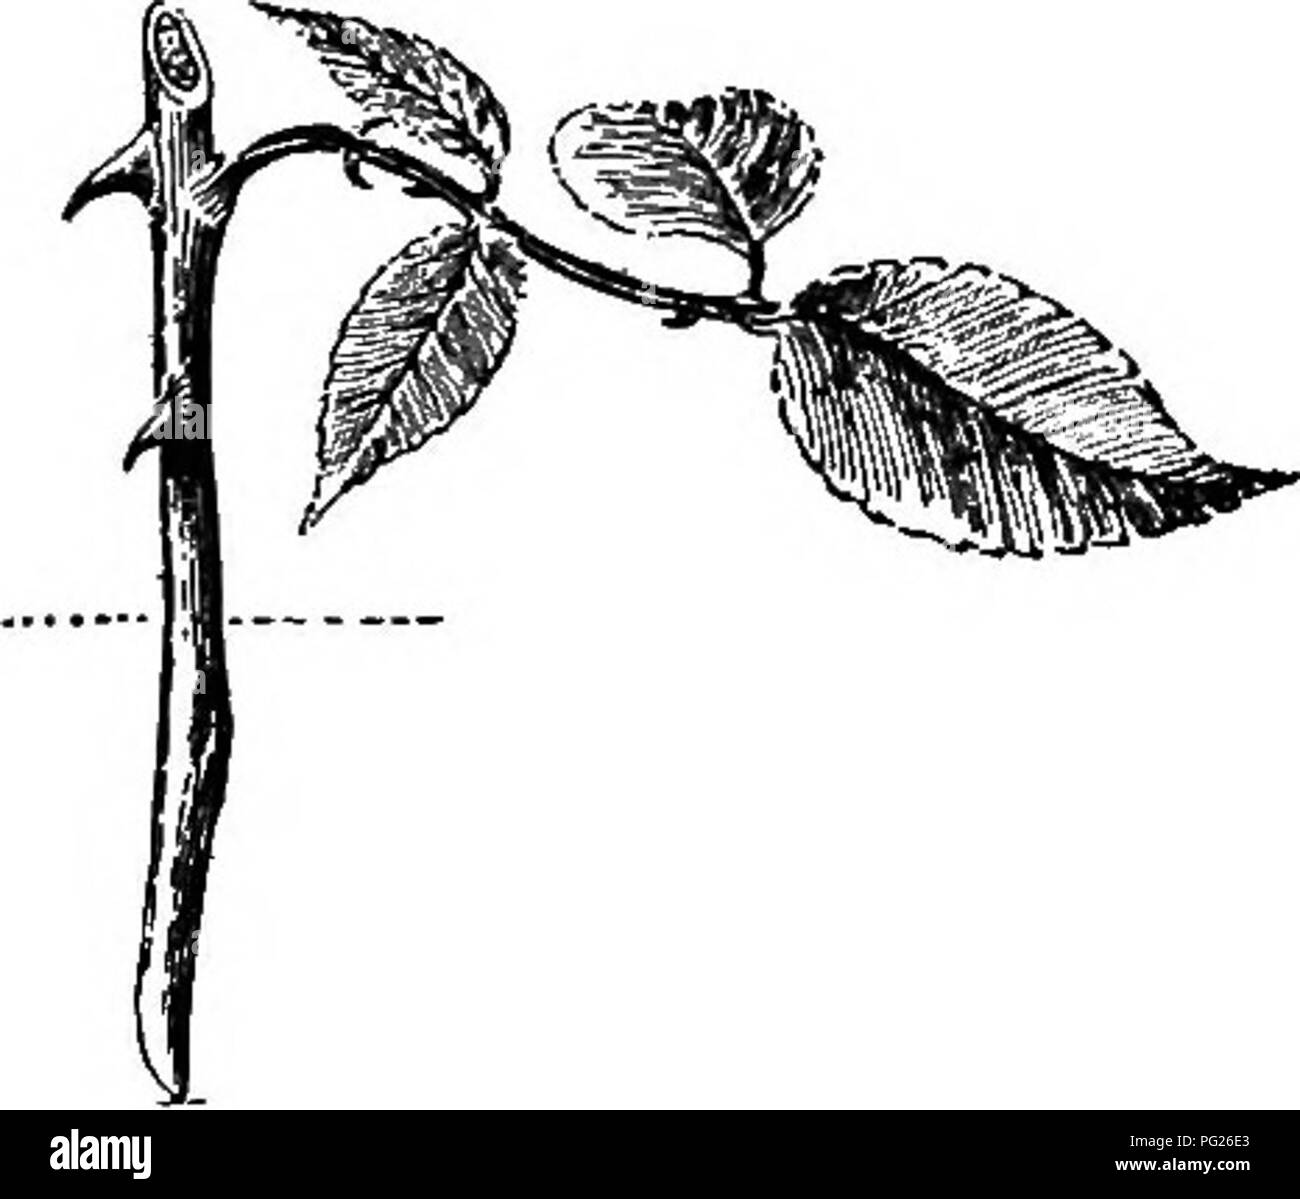 . Beginners' botany. Botany. Fig. 158. —Geranium Cutting. Fig. 159.—Rose Cutting. a leaf attached (Figs. 158, 159). It must not be allowed to wilt. Therefore, it must be protected from direct sun- light and dry air until it is well established; and if it has many leaves, some of them should be removed, or at least cut in two, in order to reduce the evaporating surface. The soil should be uniformly moist. The pictures show the depth to which the cuttings are planted. For most plants, the proper age or maturity of wood for the making of cuttings may be determined by giving the twig a quick bend: Stock Photo